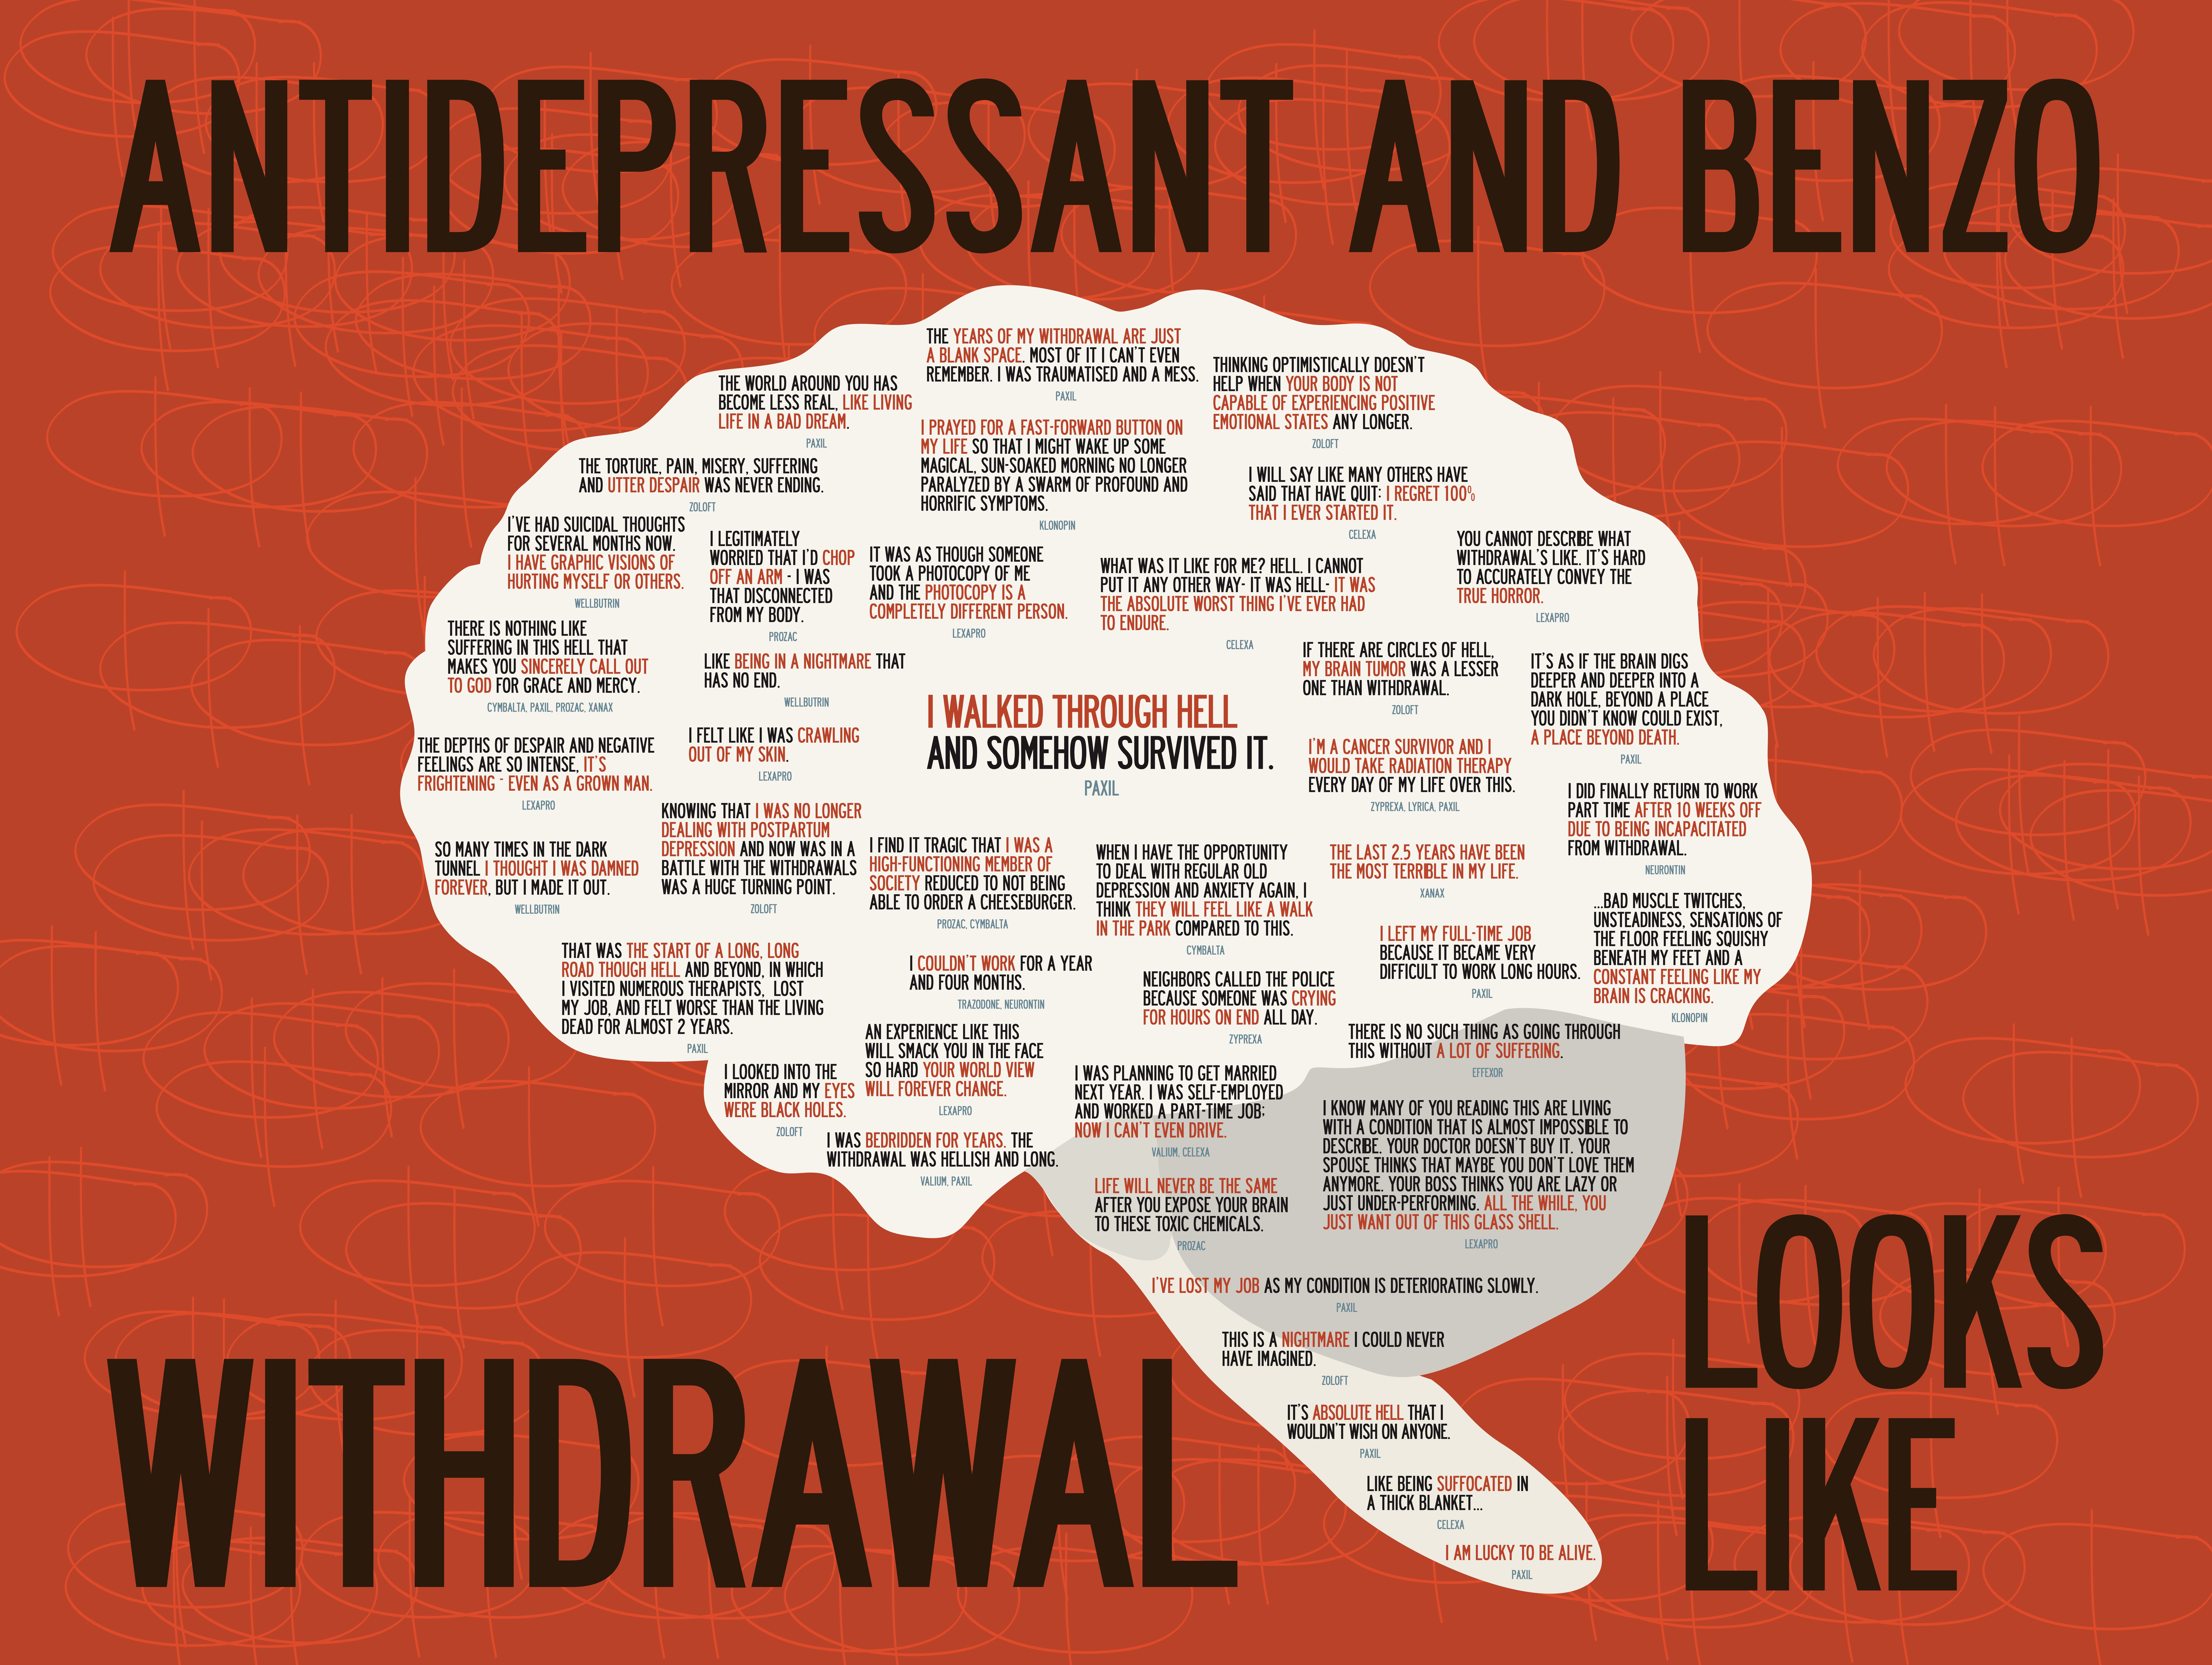 Image of artwork titled "Antidepressant and Benzo Withdrawal Looks Like" by Kelly Davis